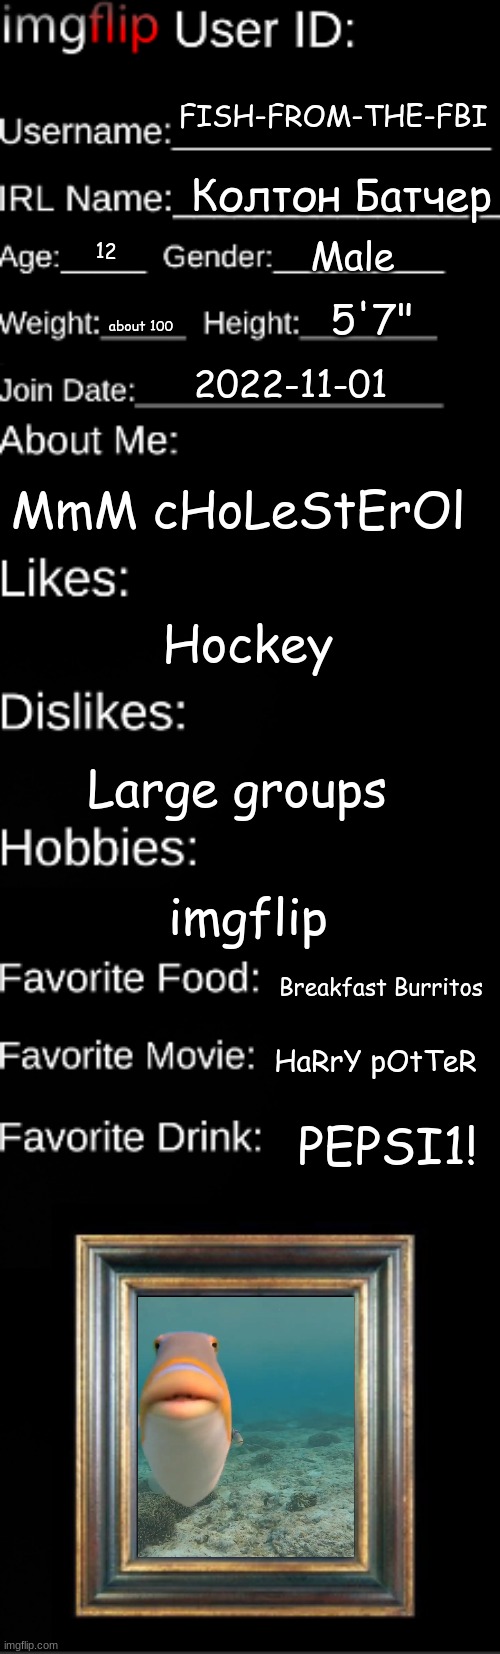 Fish | FISH-FROM-THE-FBI; Колтон Батчер; Male; 12; 5'7"; about 100; 2022-11-01; MmM cHoLeStErOl; Hockey; Large groups; imgflip; Breakfast Burritos; HaRrY pOtTeR; PEPSI1! | image tagged in imgflip user id | made w/ Imgflip meme maker